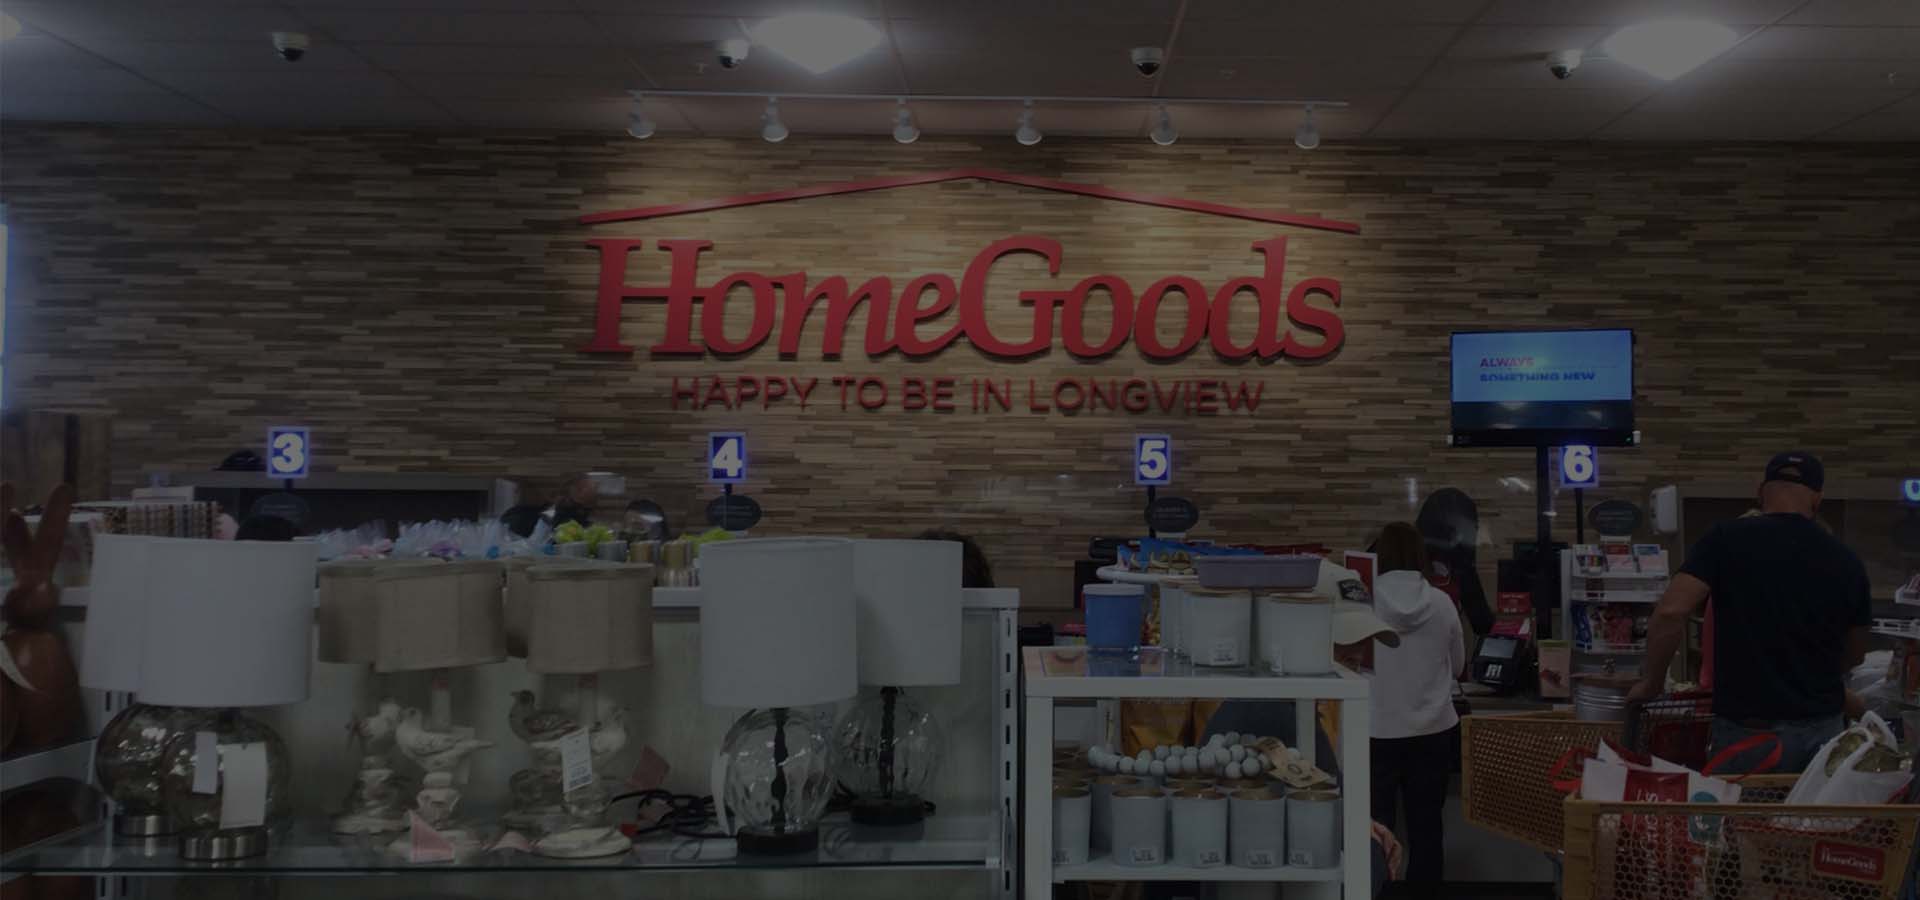 Wildts Wiring has worked with Homegoods!